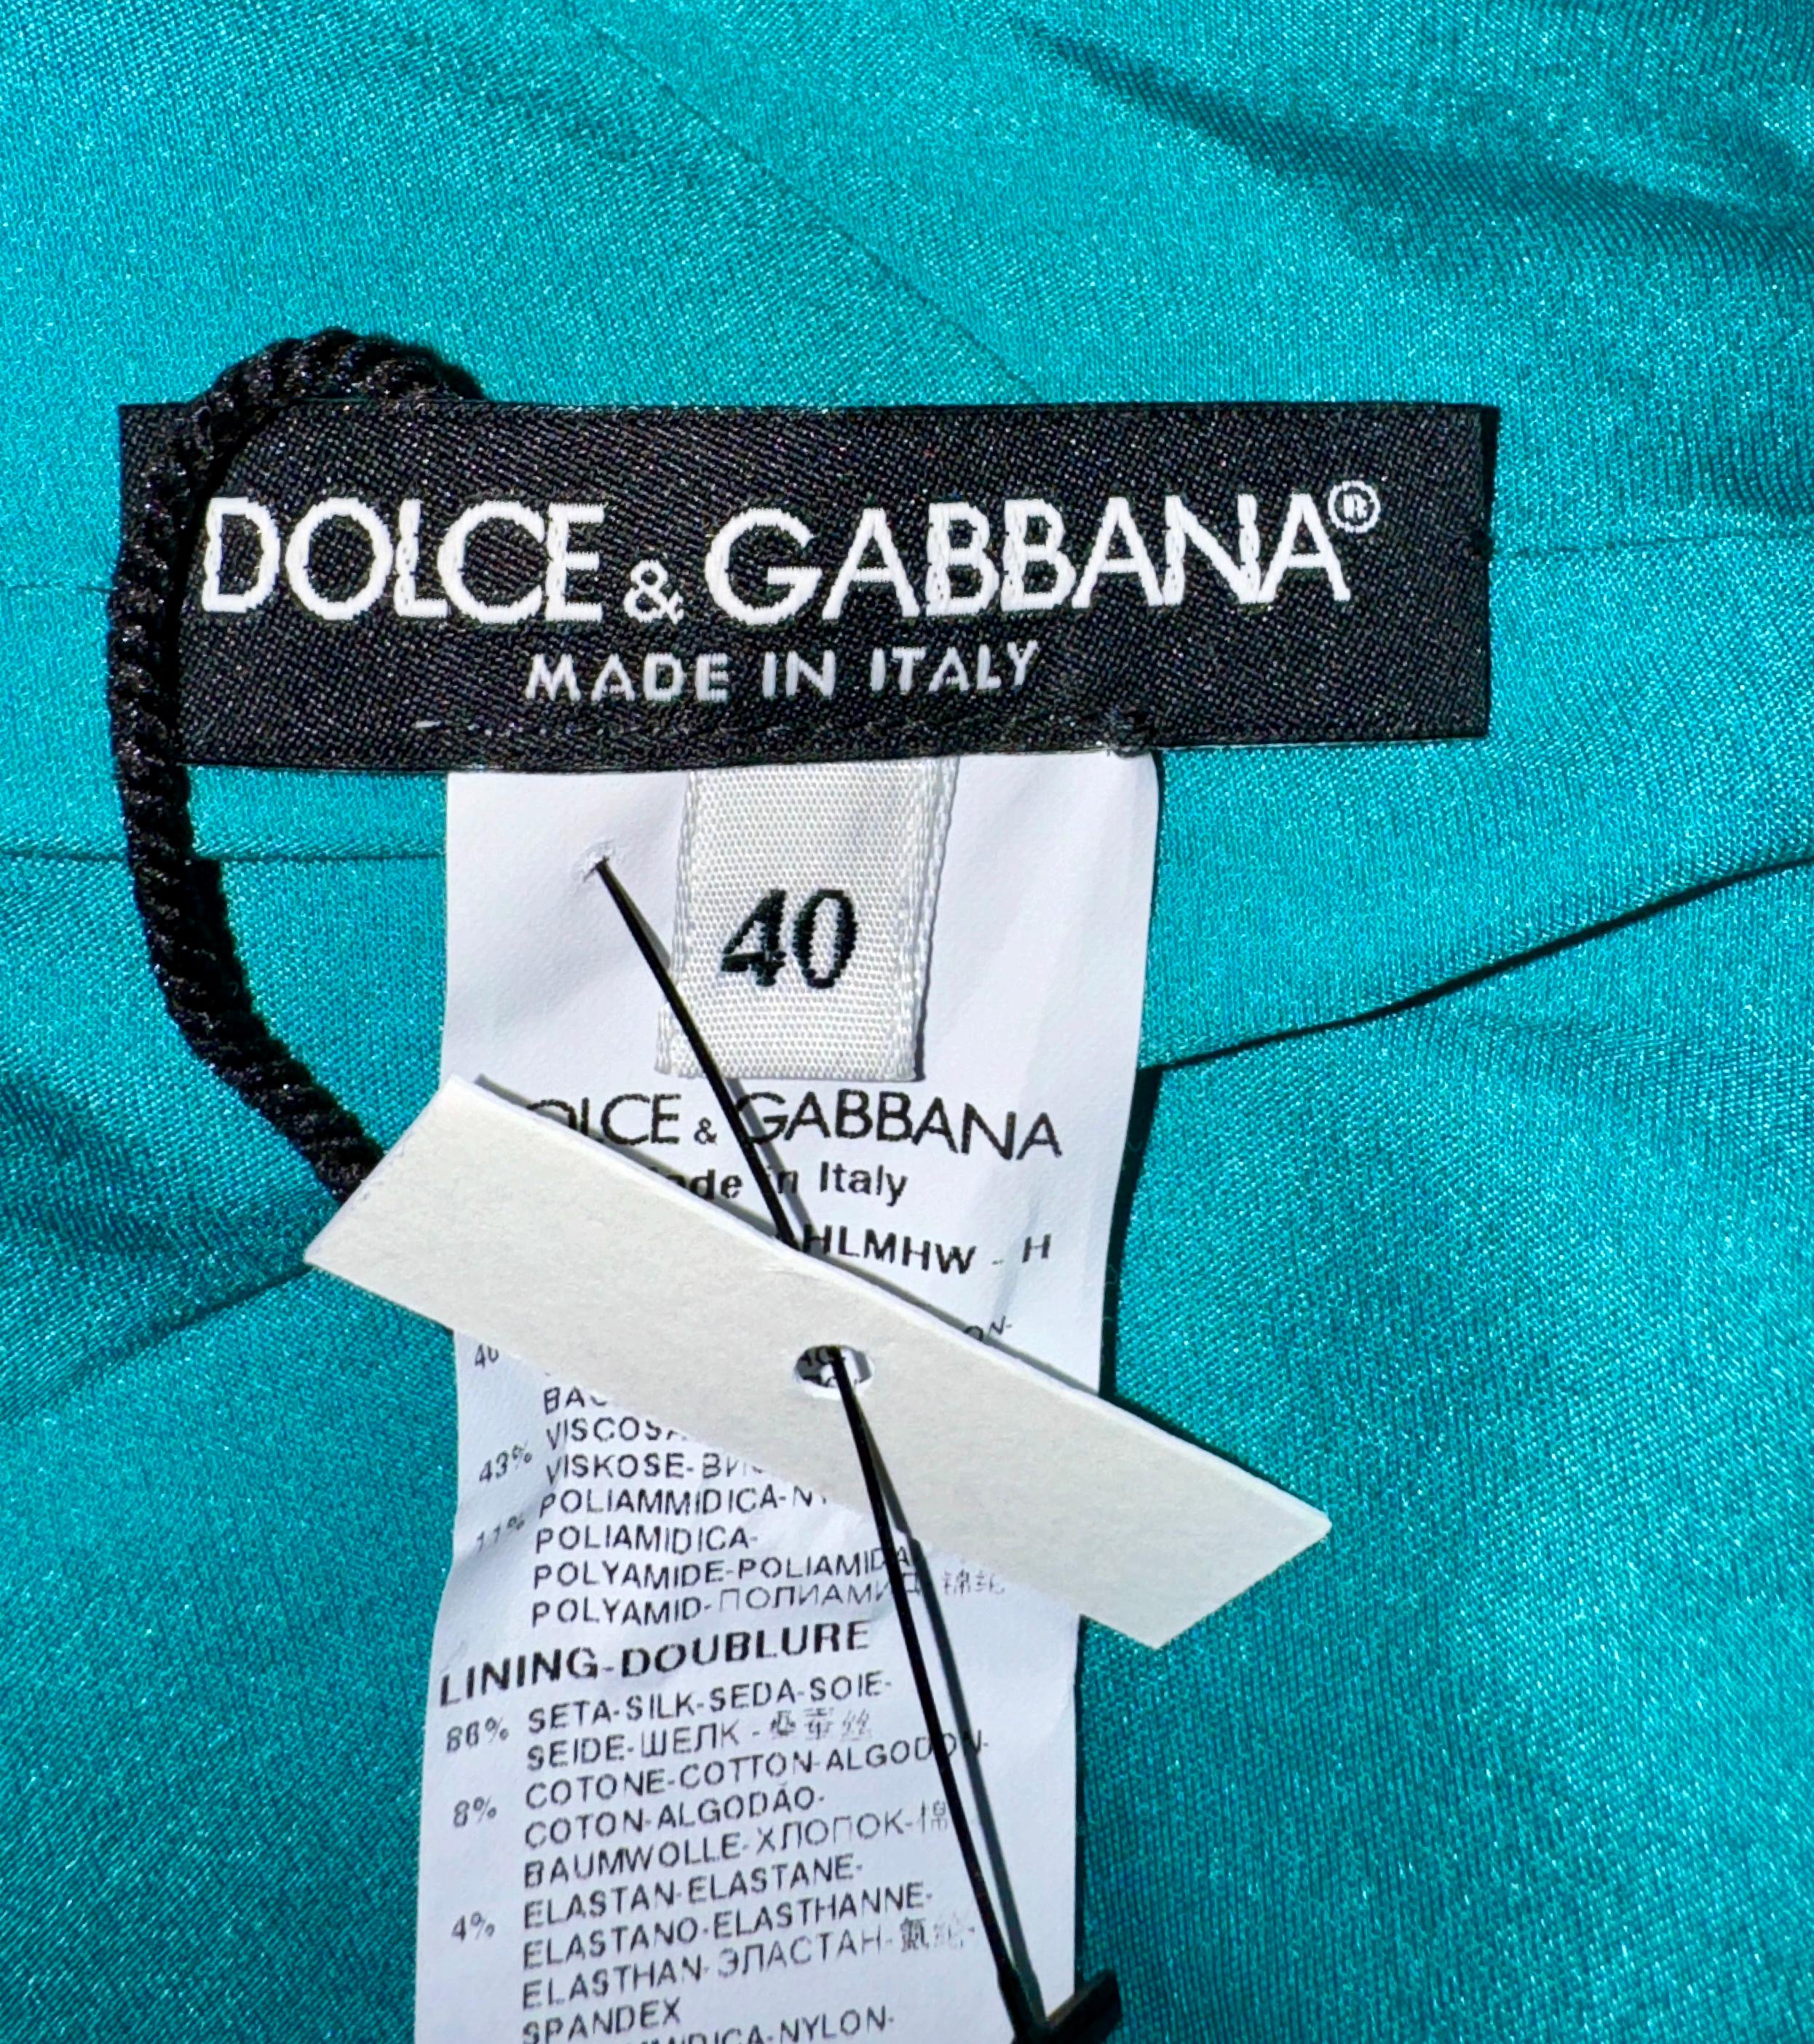 NEW Dolce & Gabbana Turquoise Aqua Lace Crystal Floral Buttons Shift Dress 40 For Sale 5